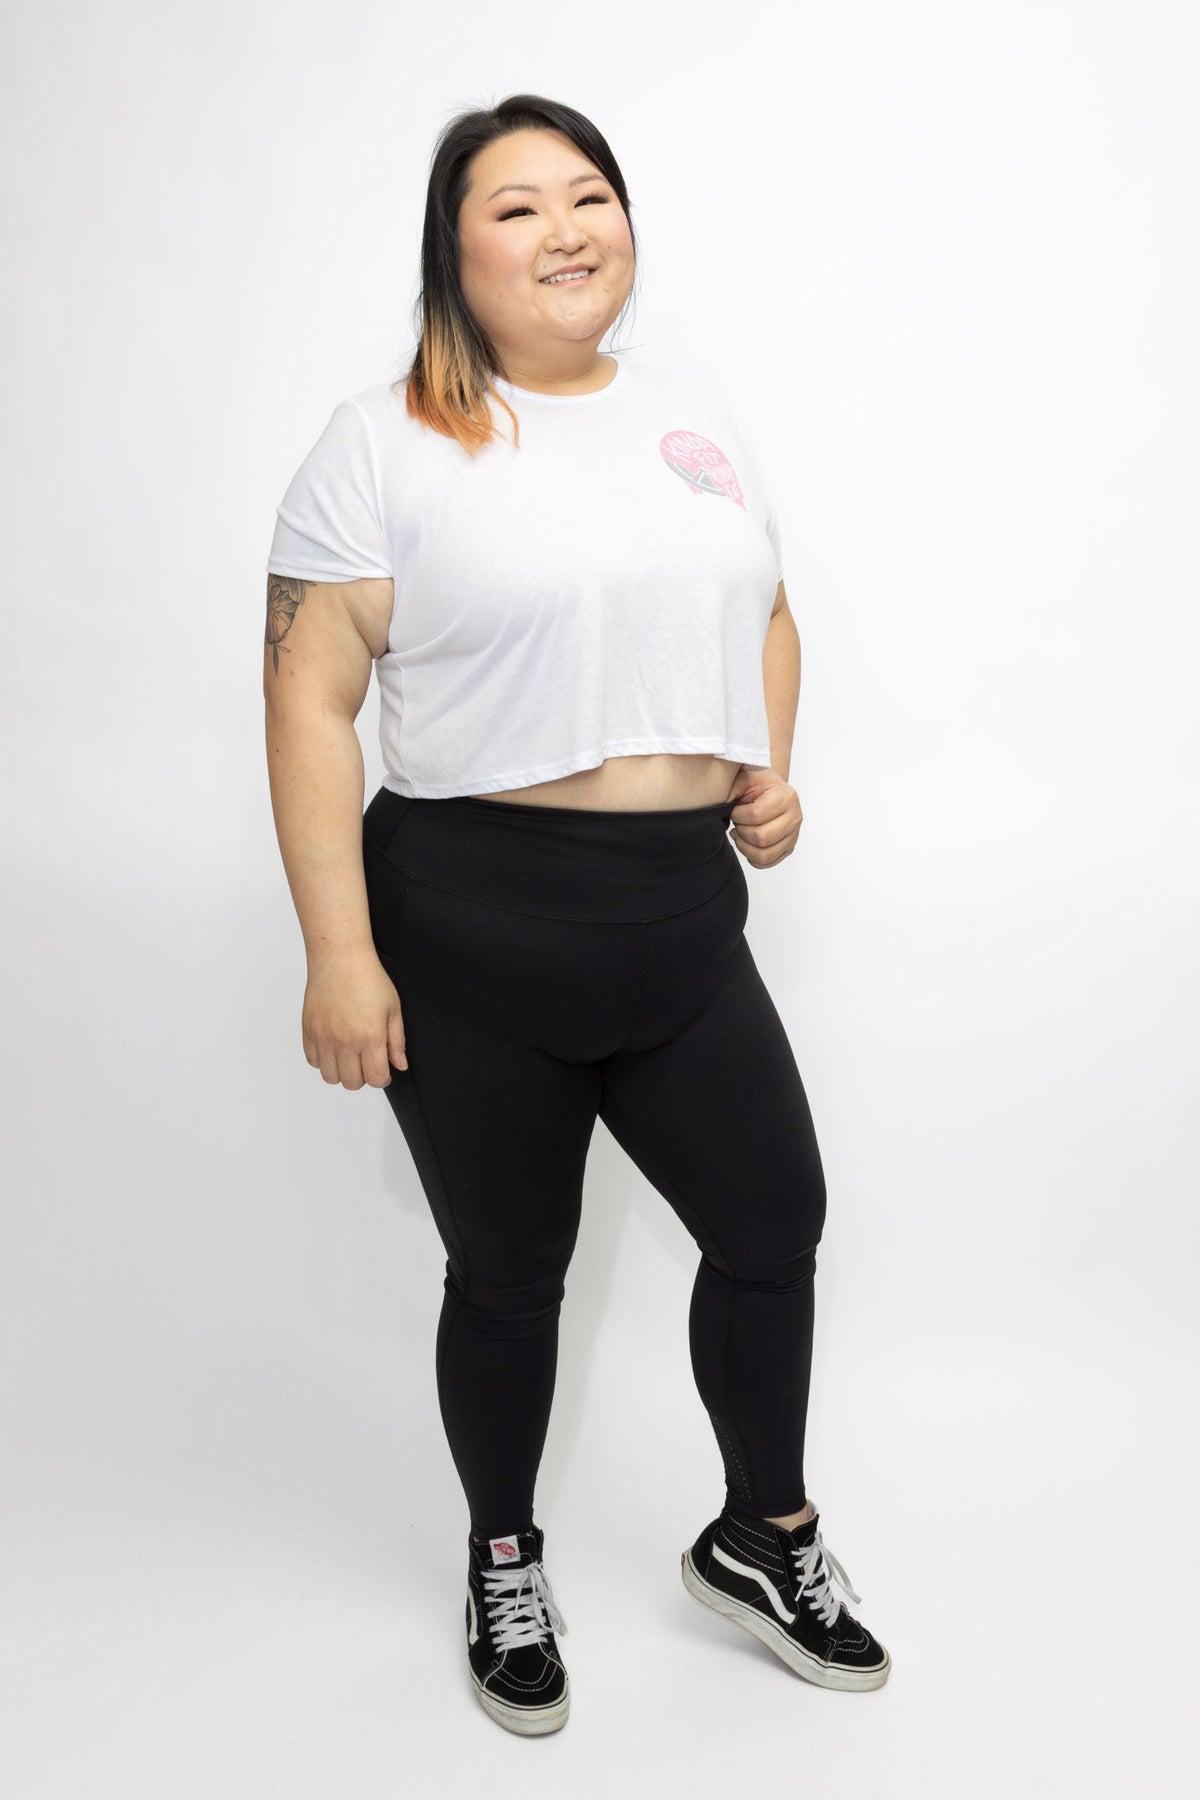 Kinda Fit Kinda Fat Frosted Plates Cropped Tee (White)